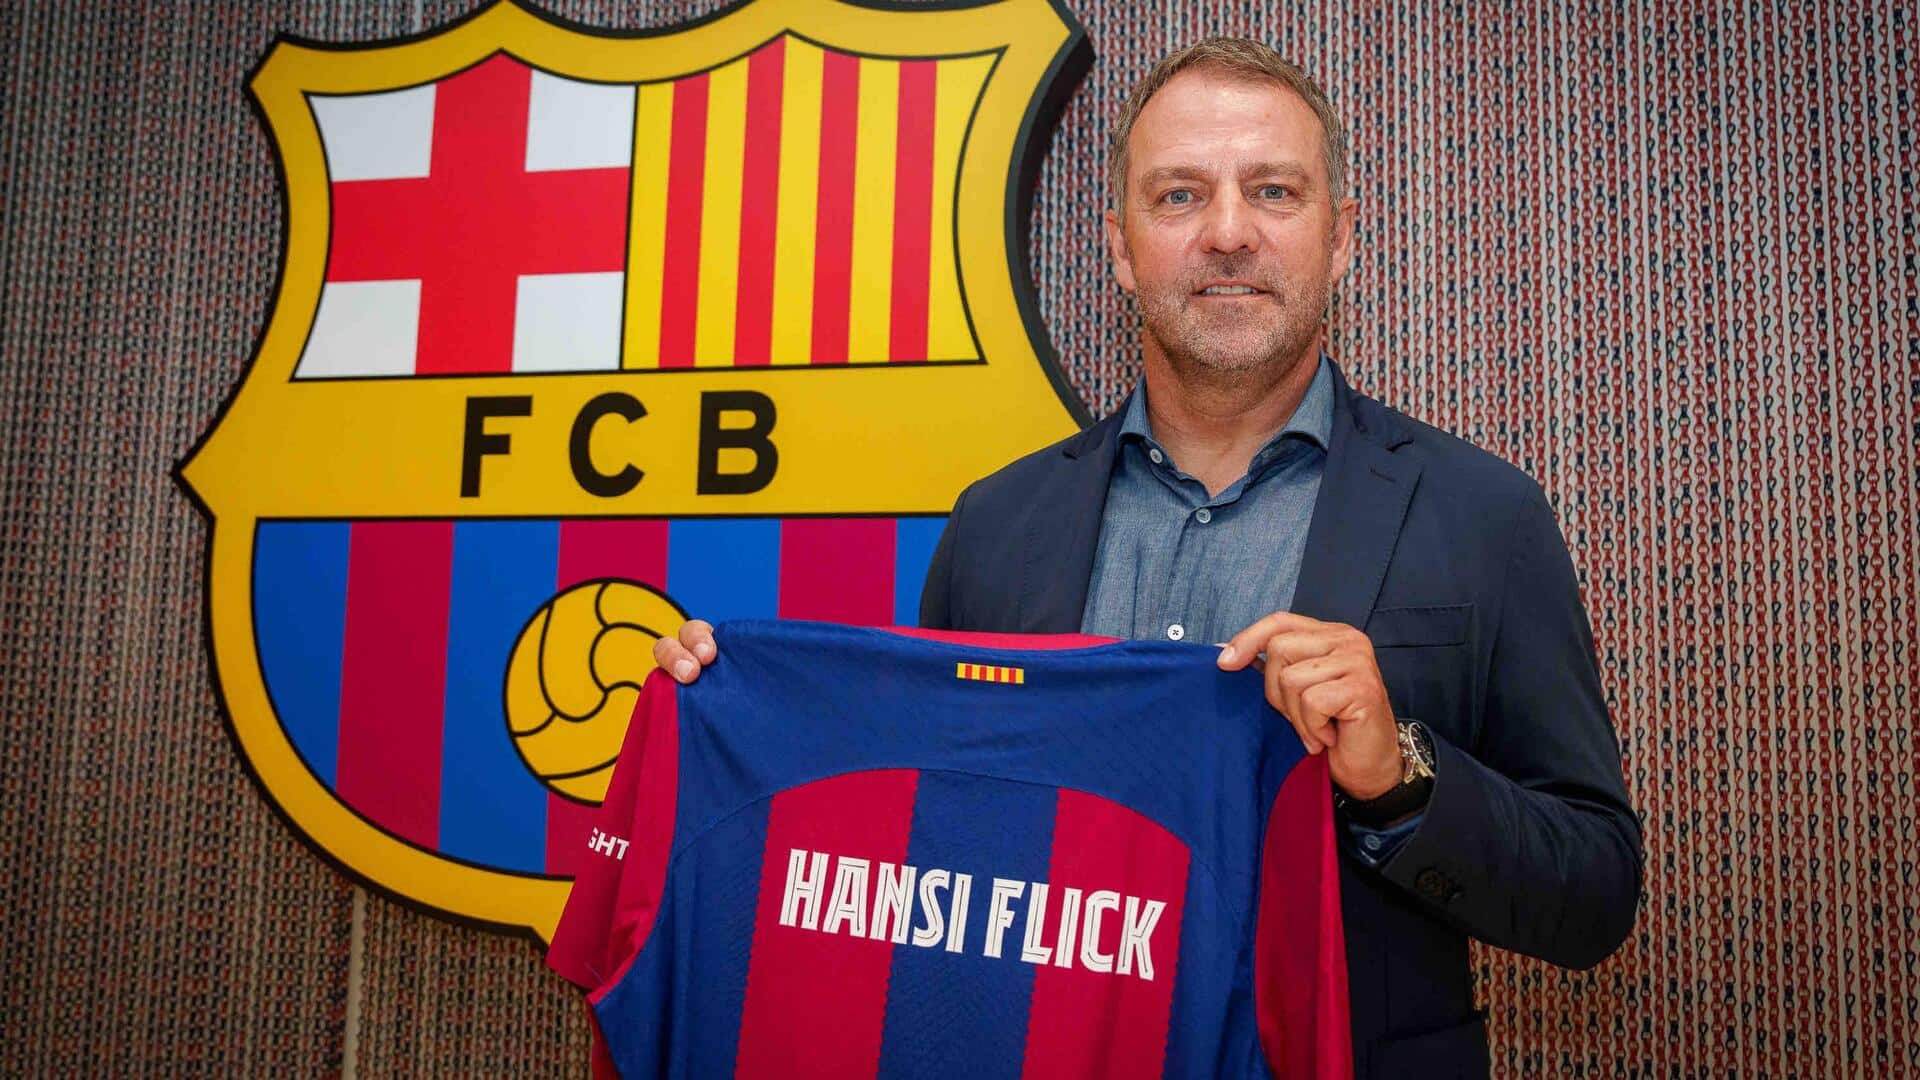 Barcelona appoint Hansi Flick as new manager: Decoding his stats